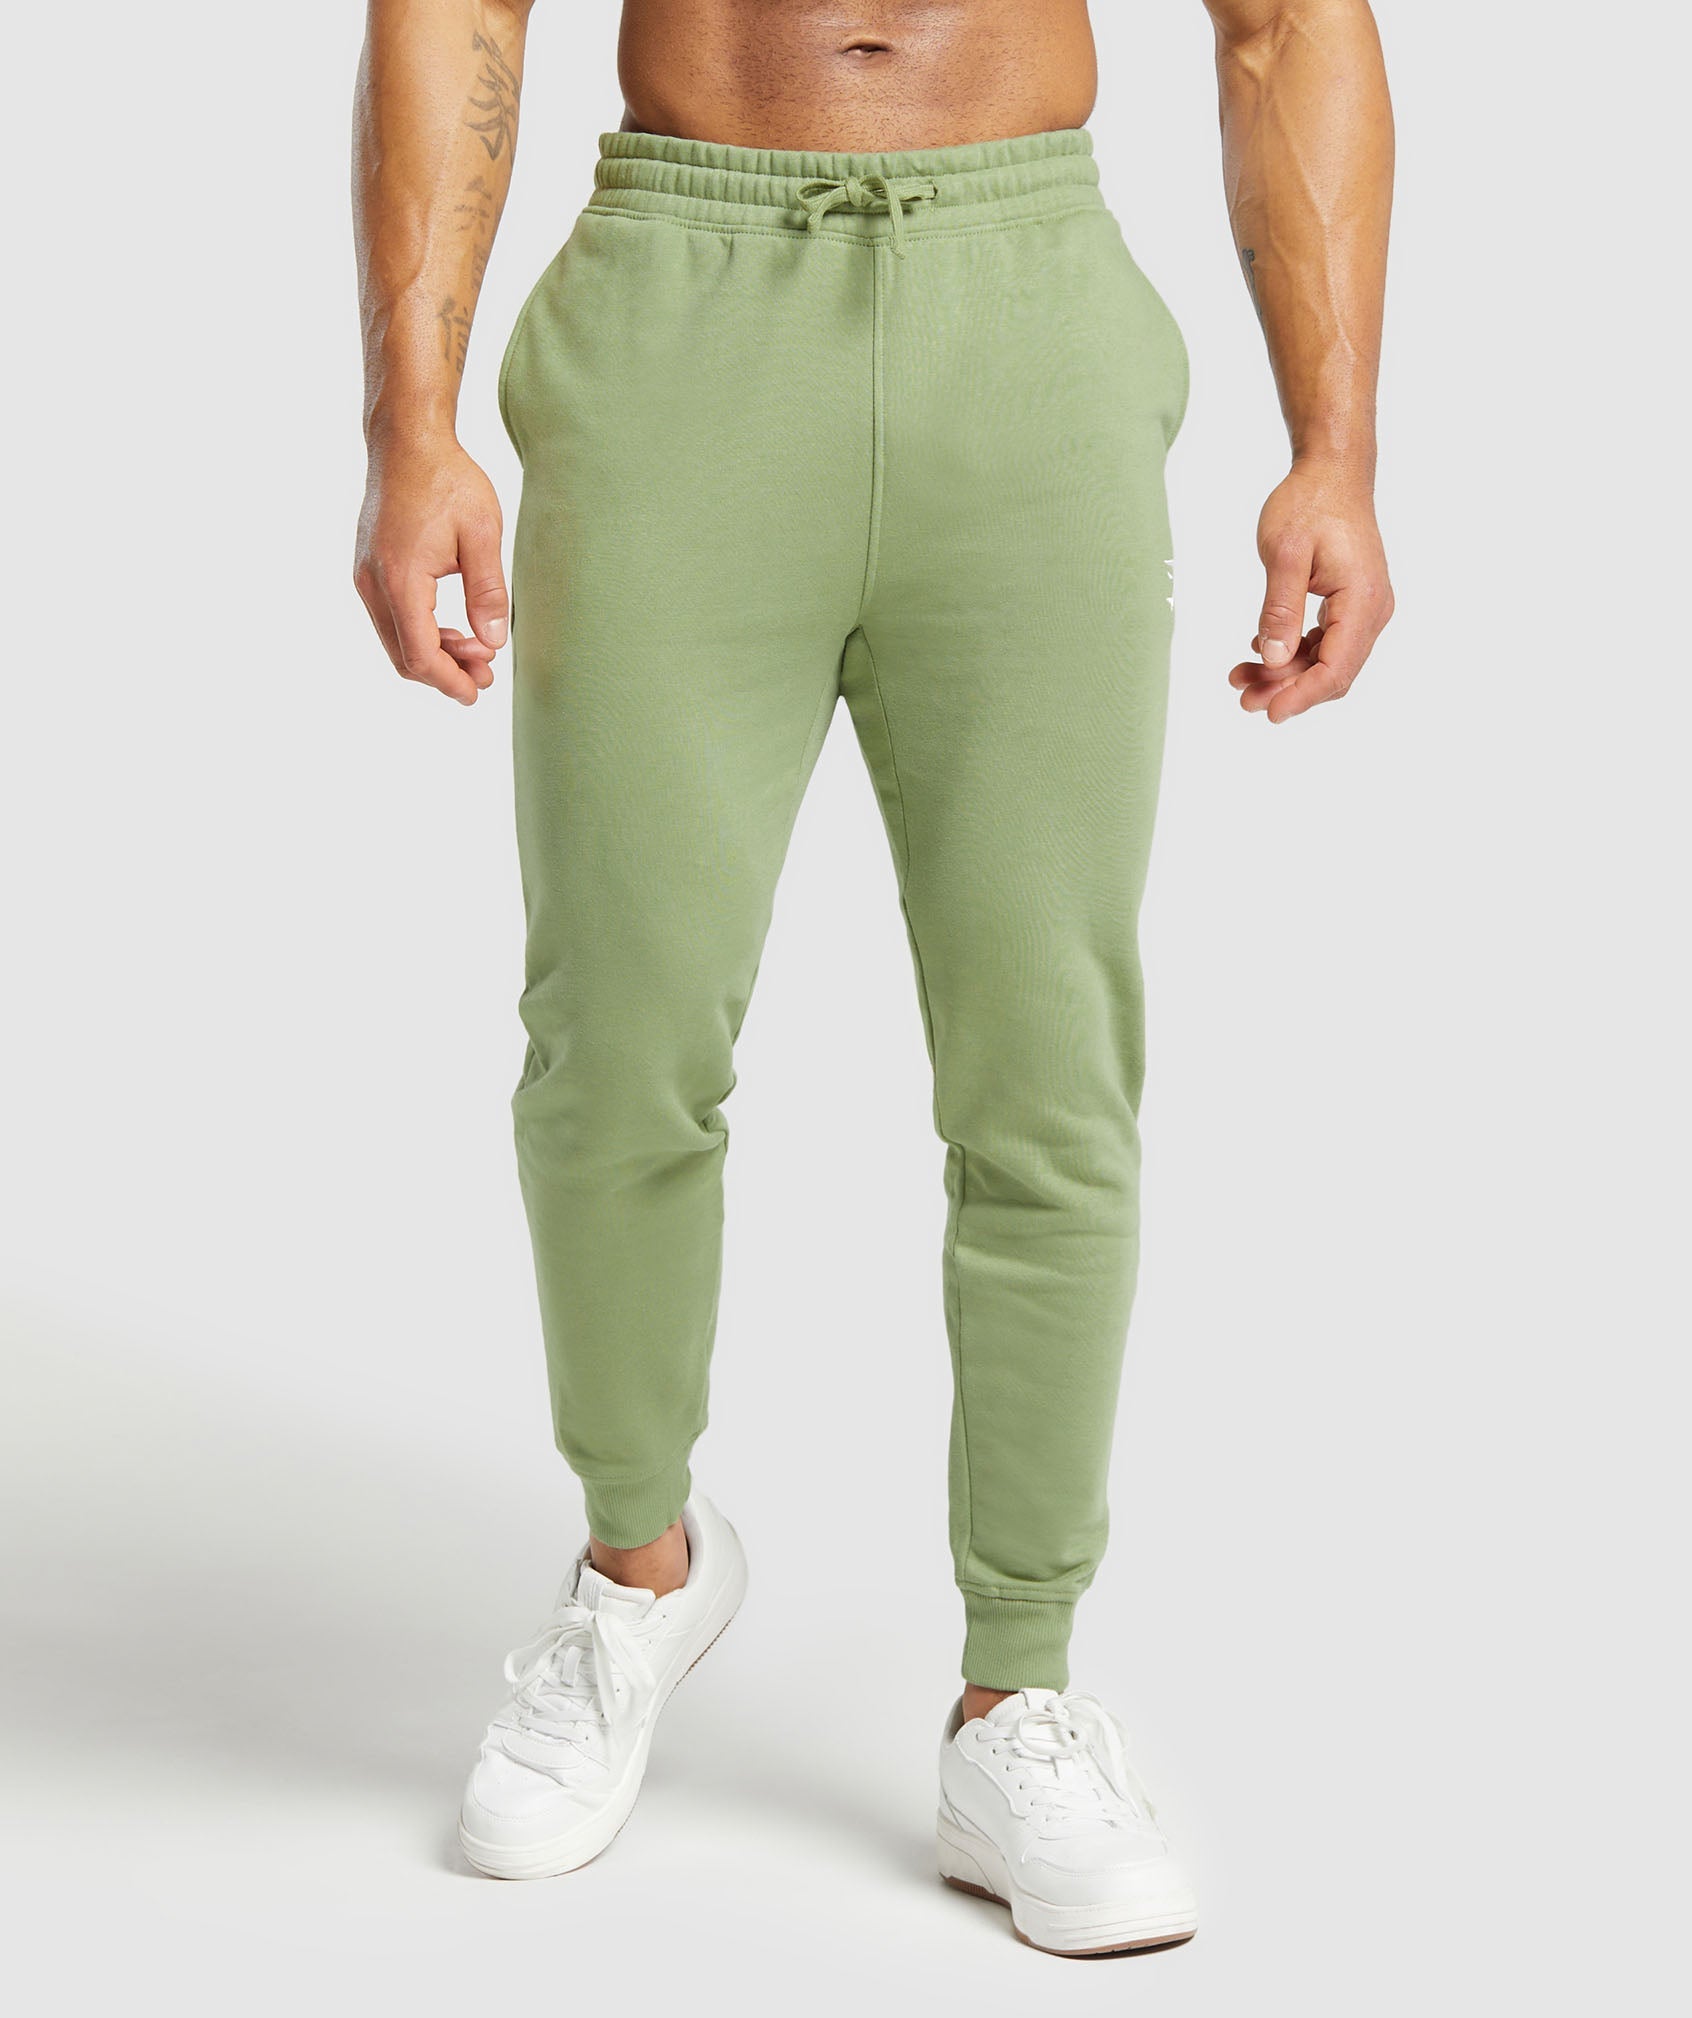 Crest Joggers in Natural Sage Green